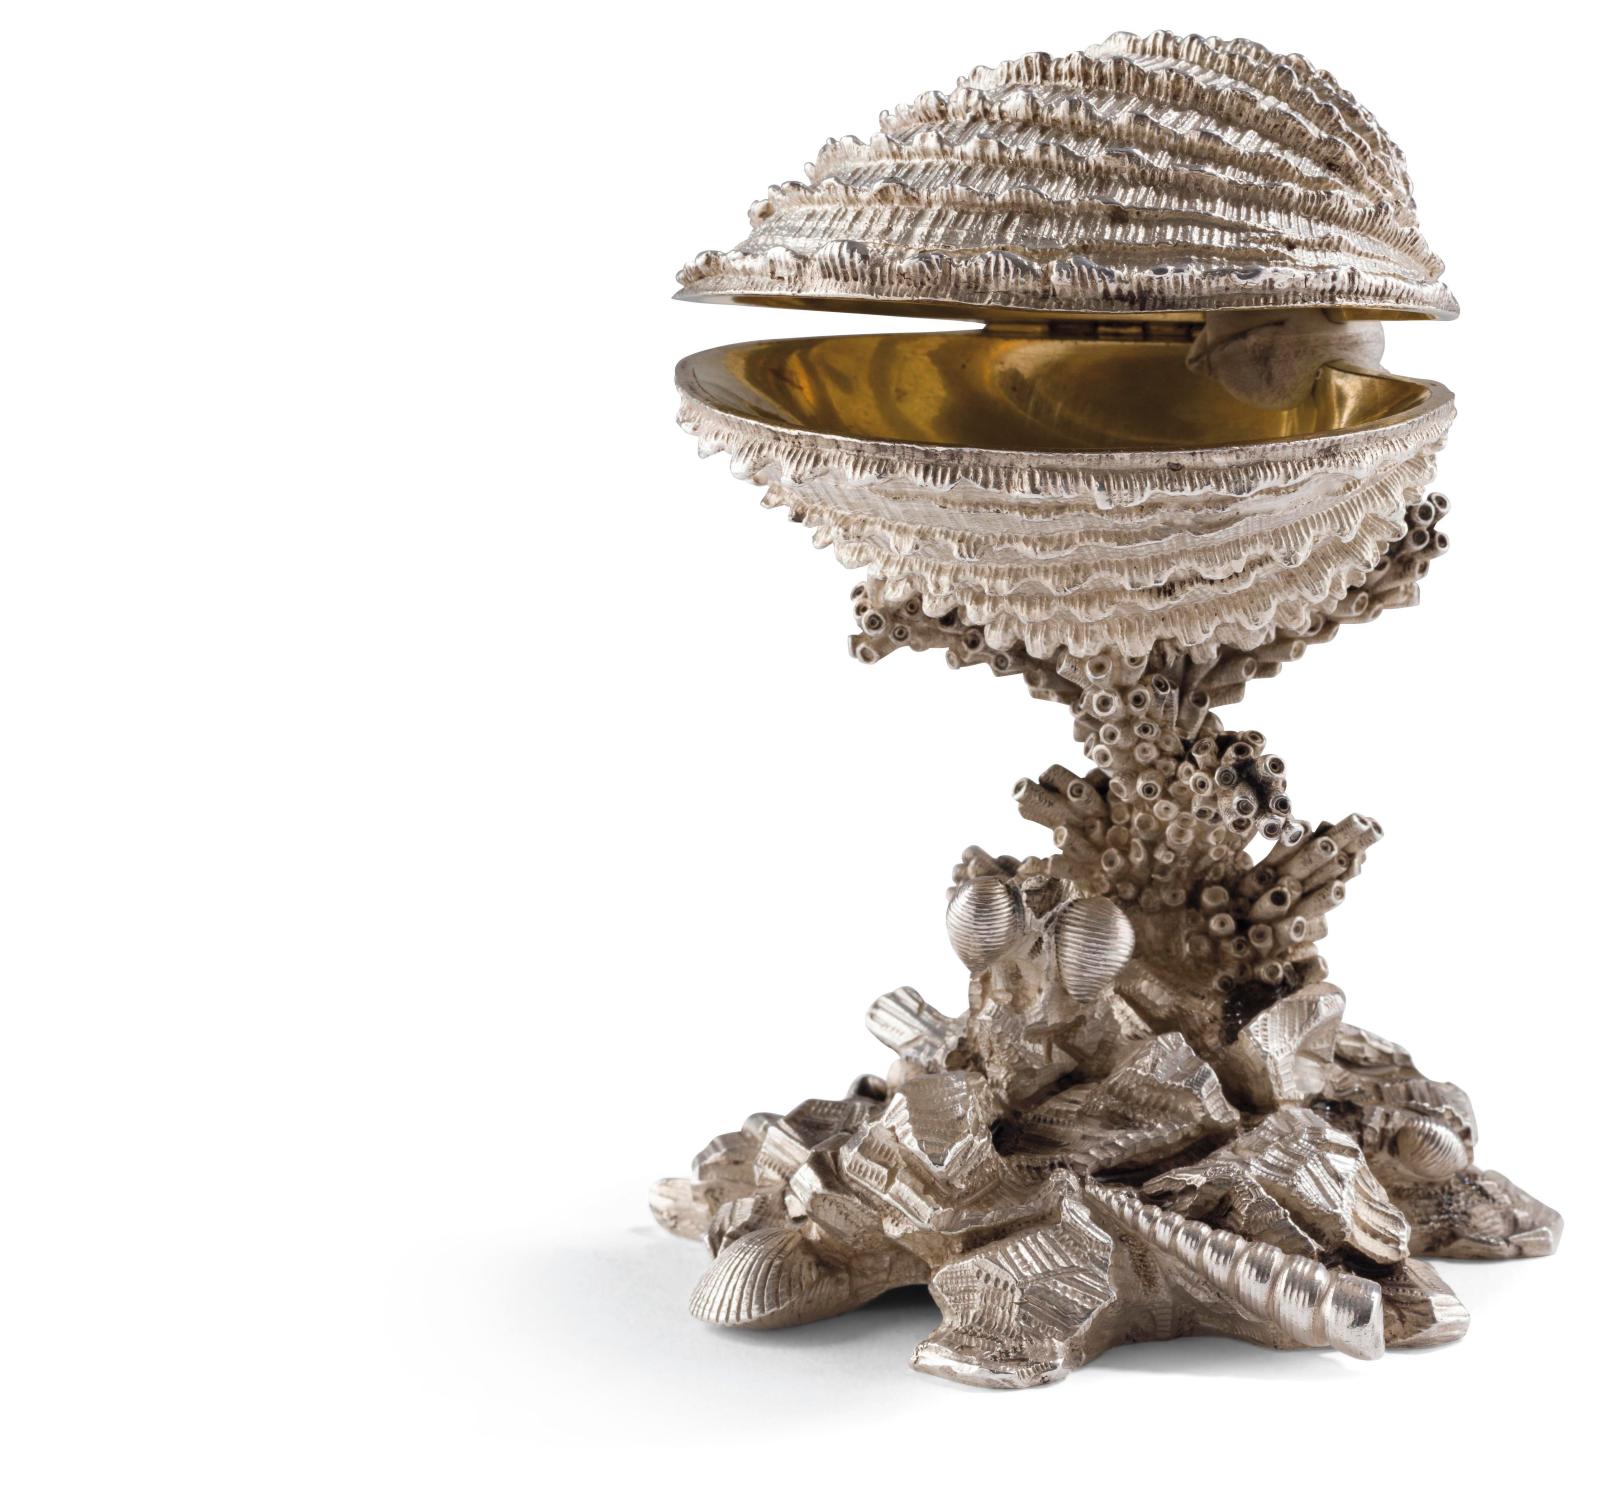 A Salt Cellar by Marc-Augustin Lebrun from the Golden Age of Silverware